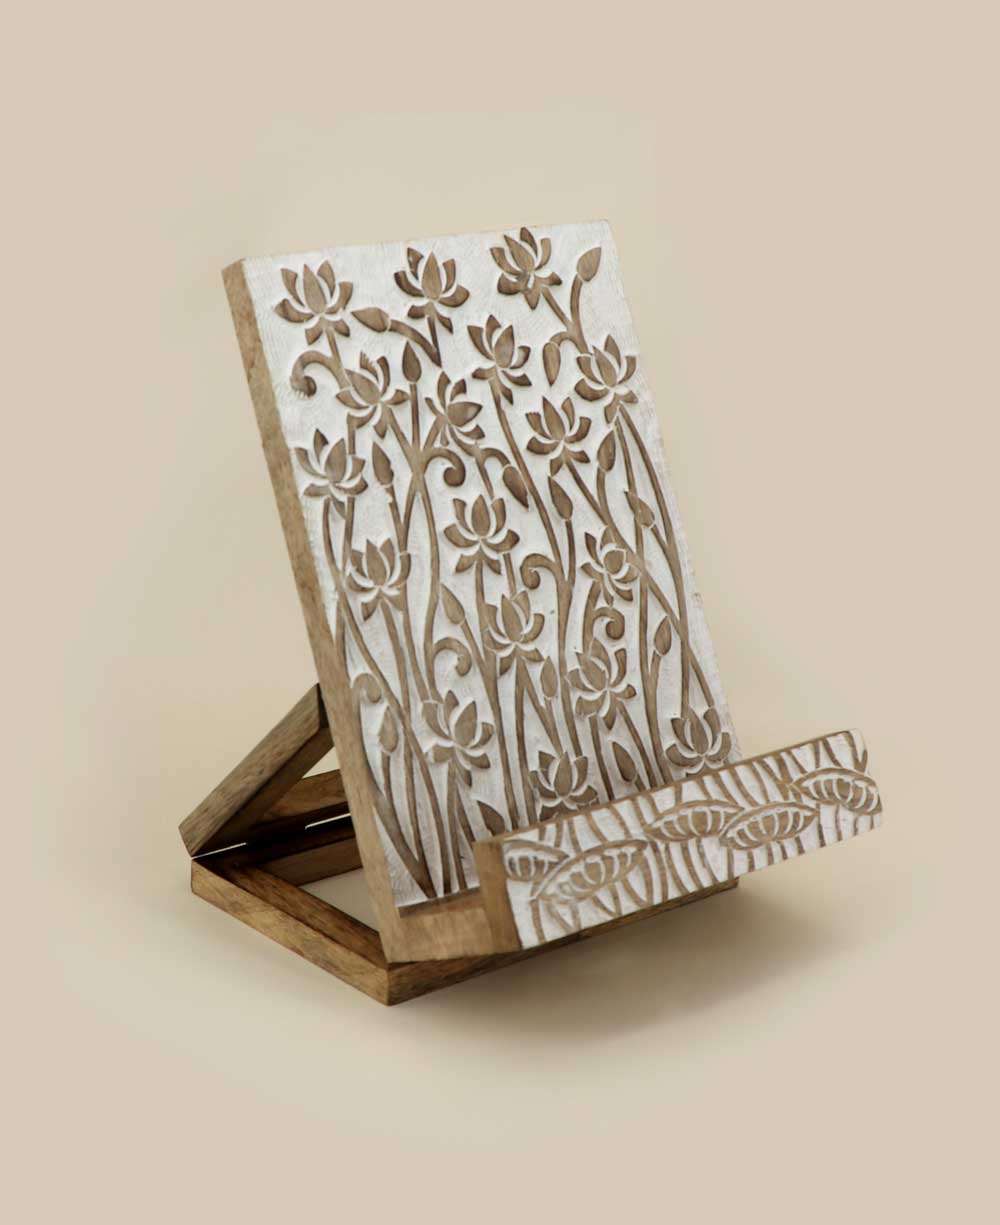 Silver Design Incense Holder - Fair Trade & Sustainable at One